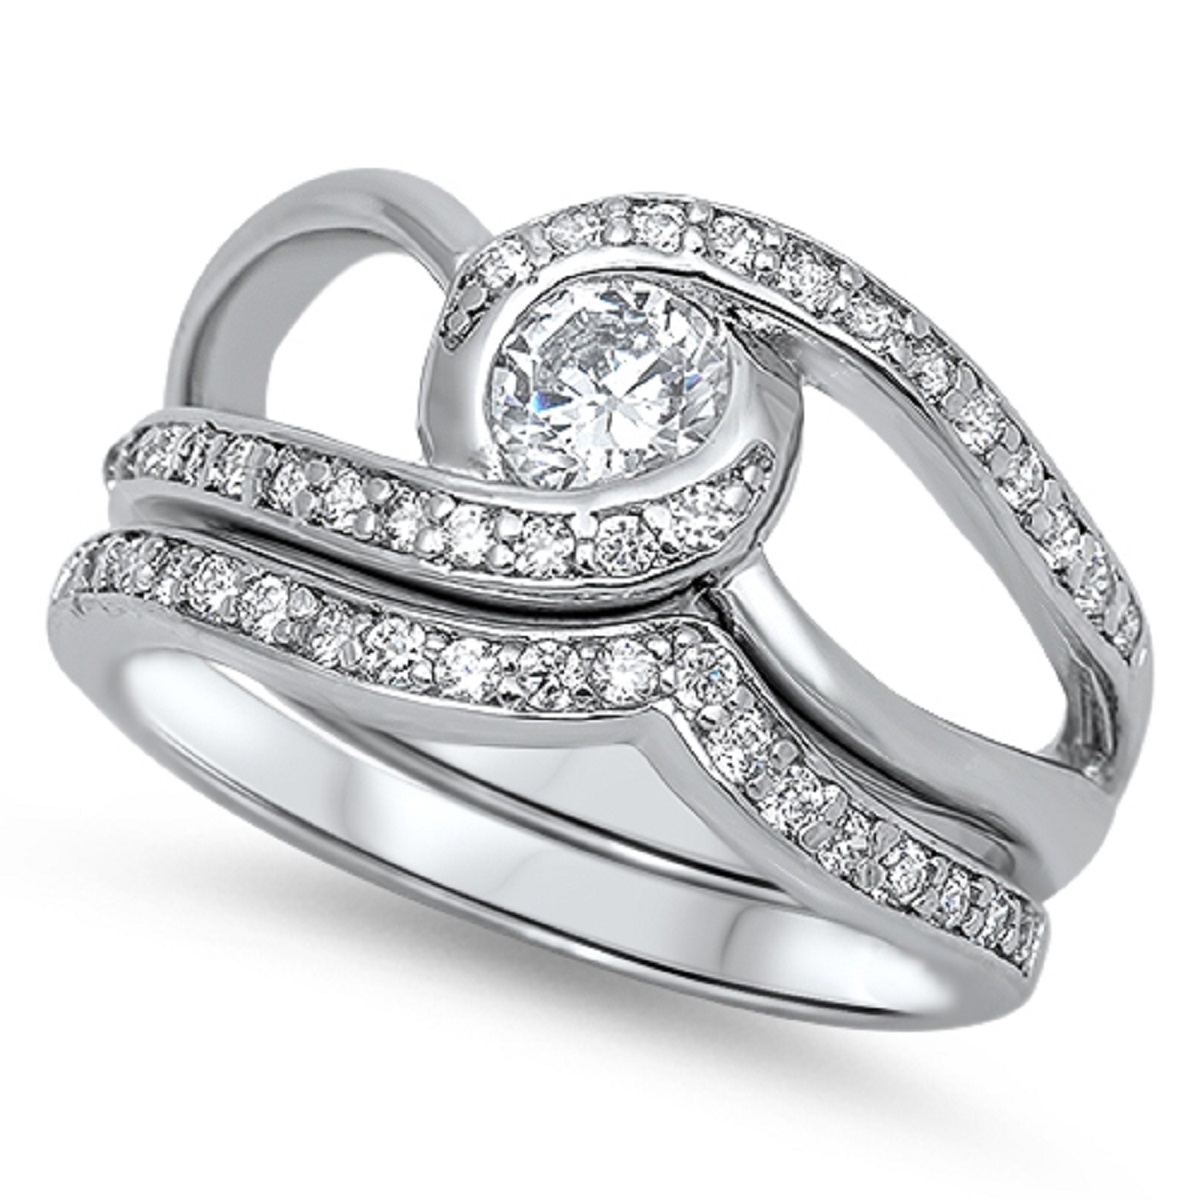 AllinStock Round Center with Round Stones Cubic Zirconia Wedding Set Ring Sterling Silver 925 